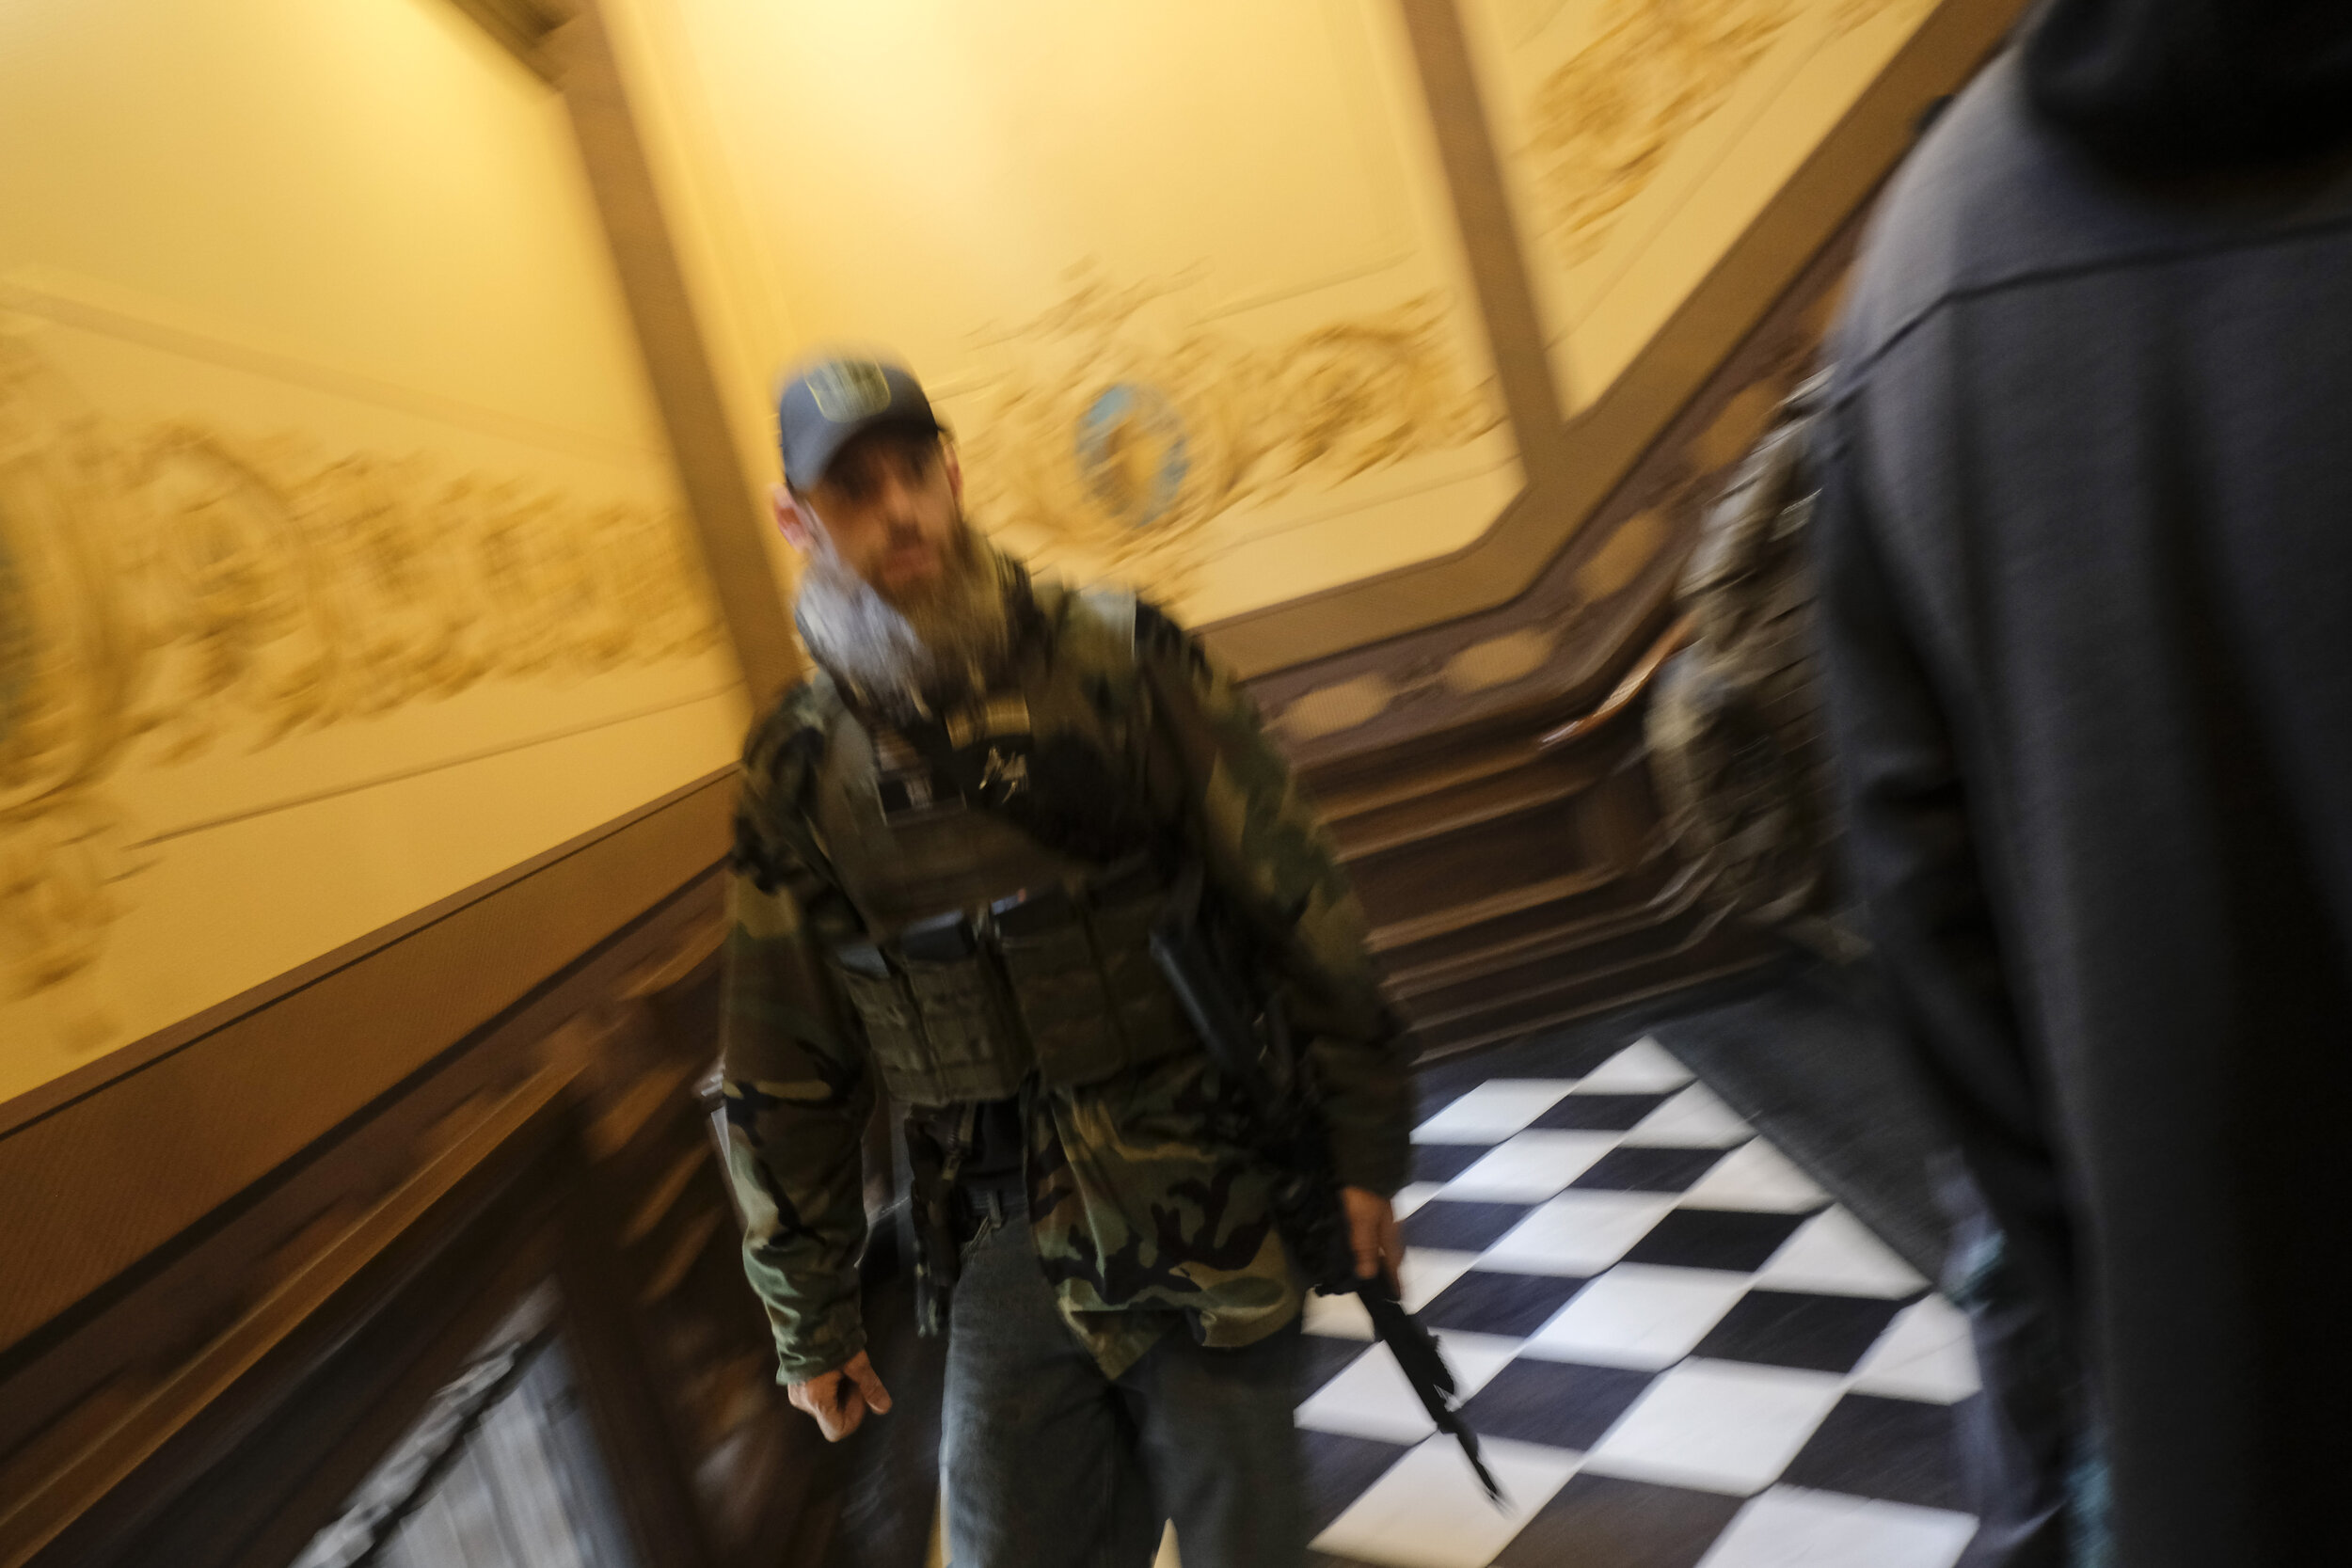  An armed member of a Michigan militia runs down the stairs shouting at police officers near the senate chamber of the Michigan Capitol Building in Lansing, Michigan on Thursday, April 30. After Michigan Governor Gretchen Whitmer announced she would 